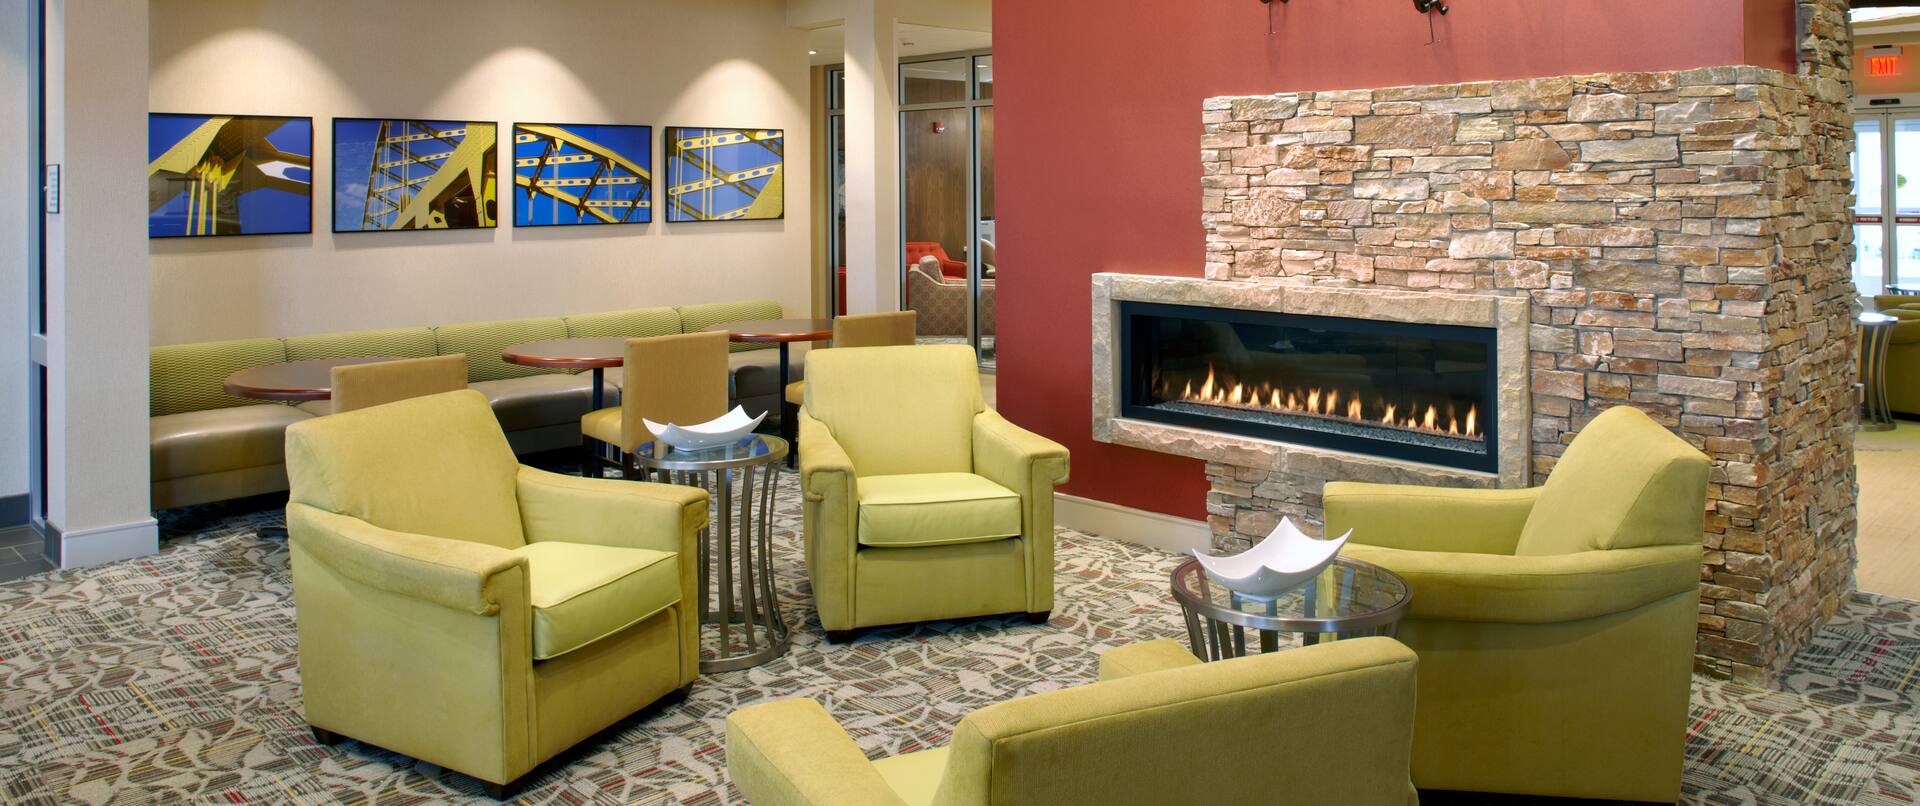 Lobby seating area with fireplace and art on the wall